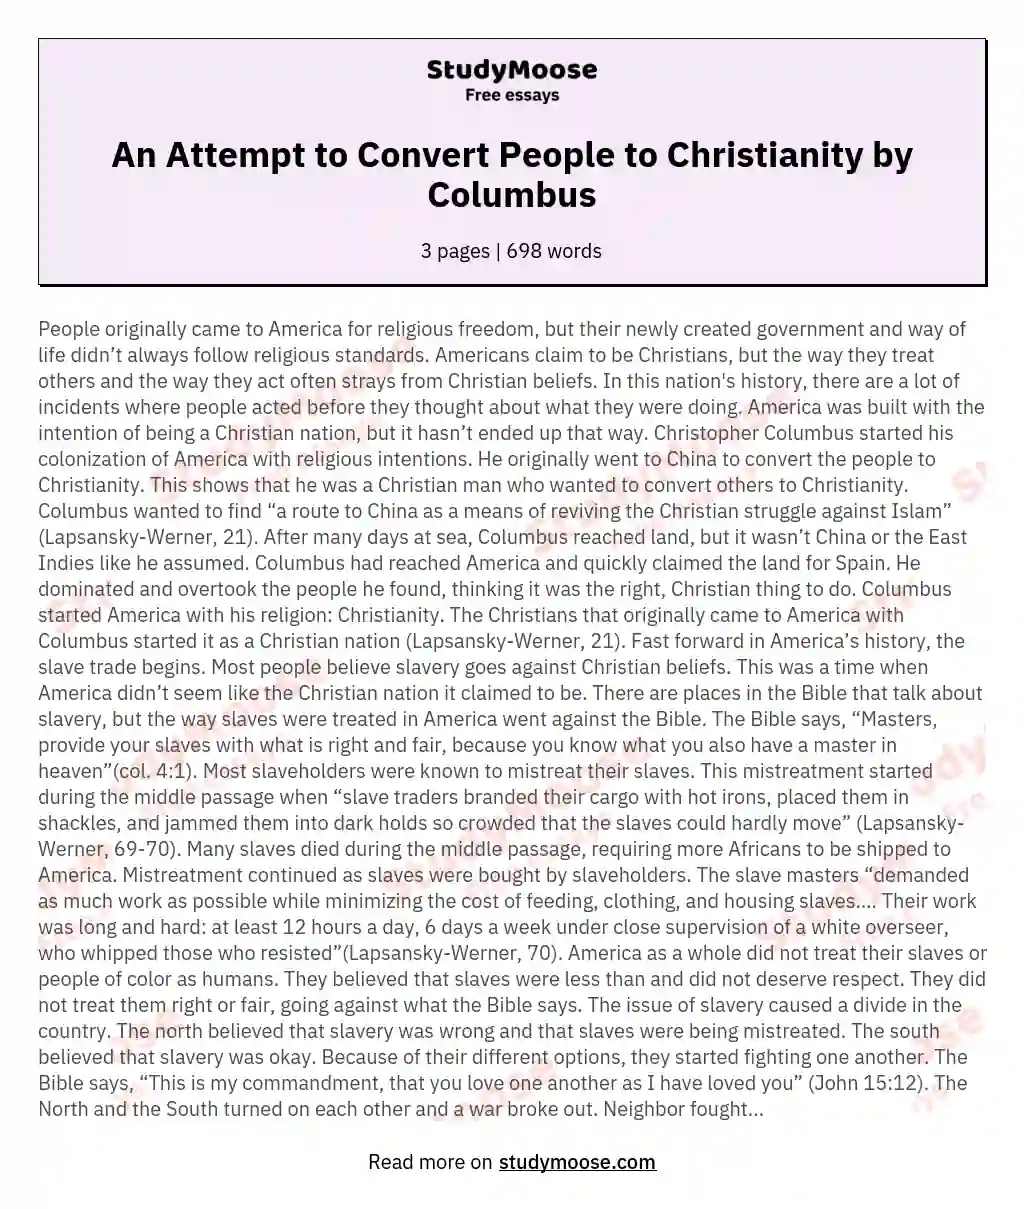 An Attempt to Convert People to Christianity by Columbus essay